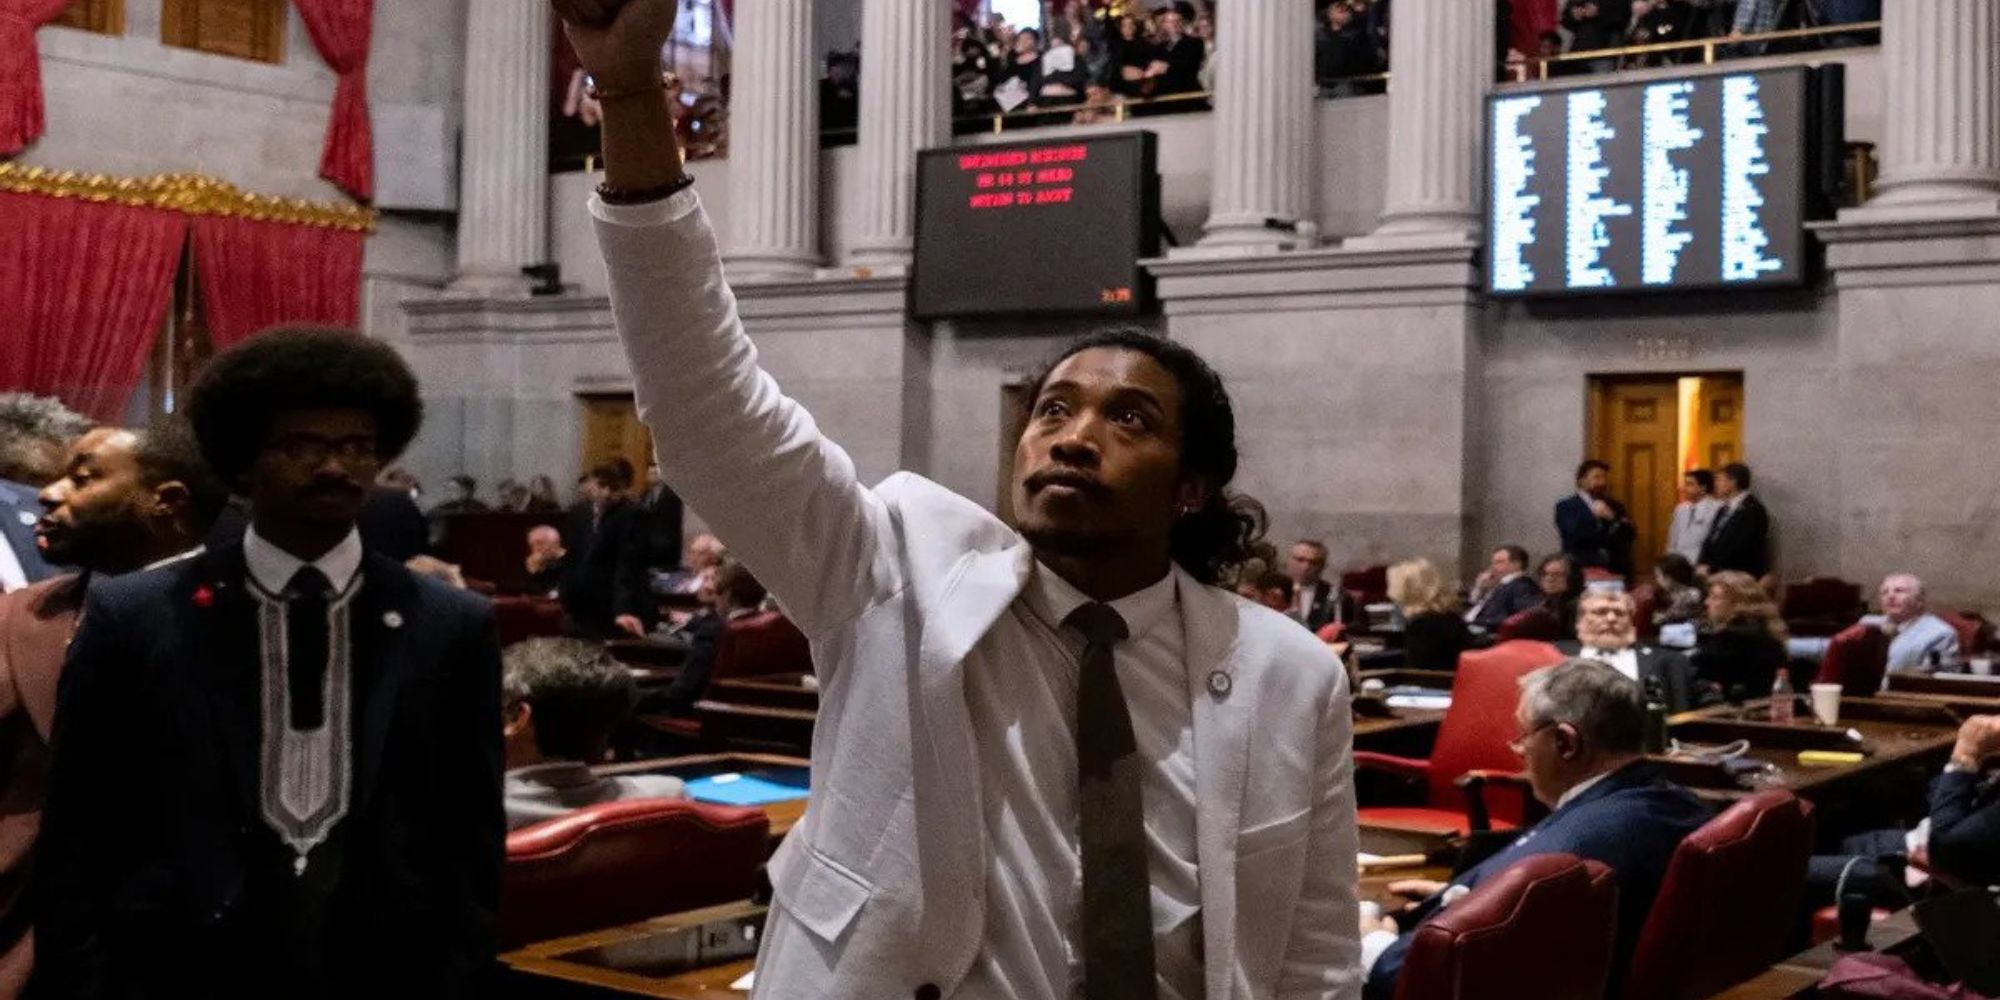 Democratic state Rep. Justin Jones of Nashville gestures during a vote on his expulsion from the state legislature at the State Capitol Building on April 6, 2023 in Nashville, Tennessee.